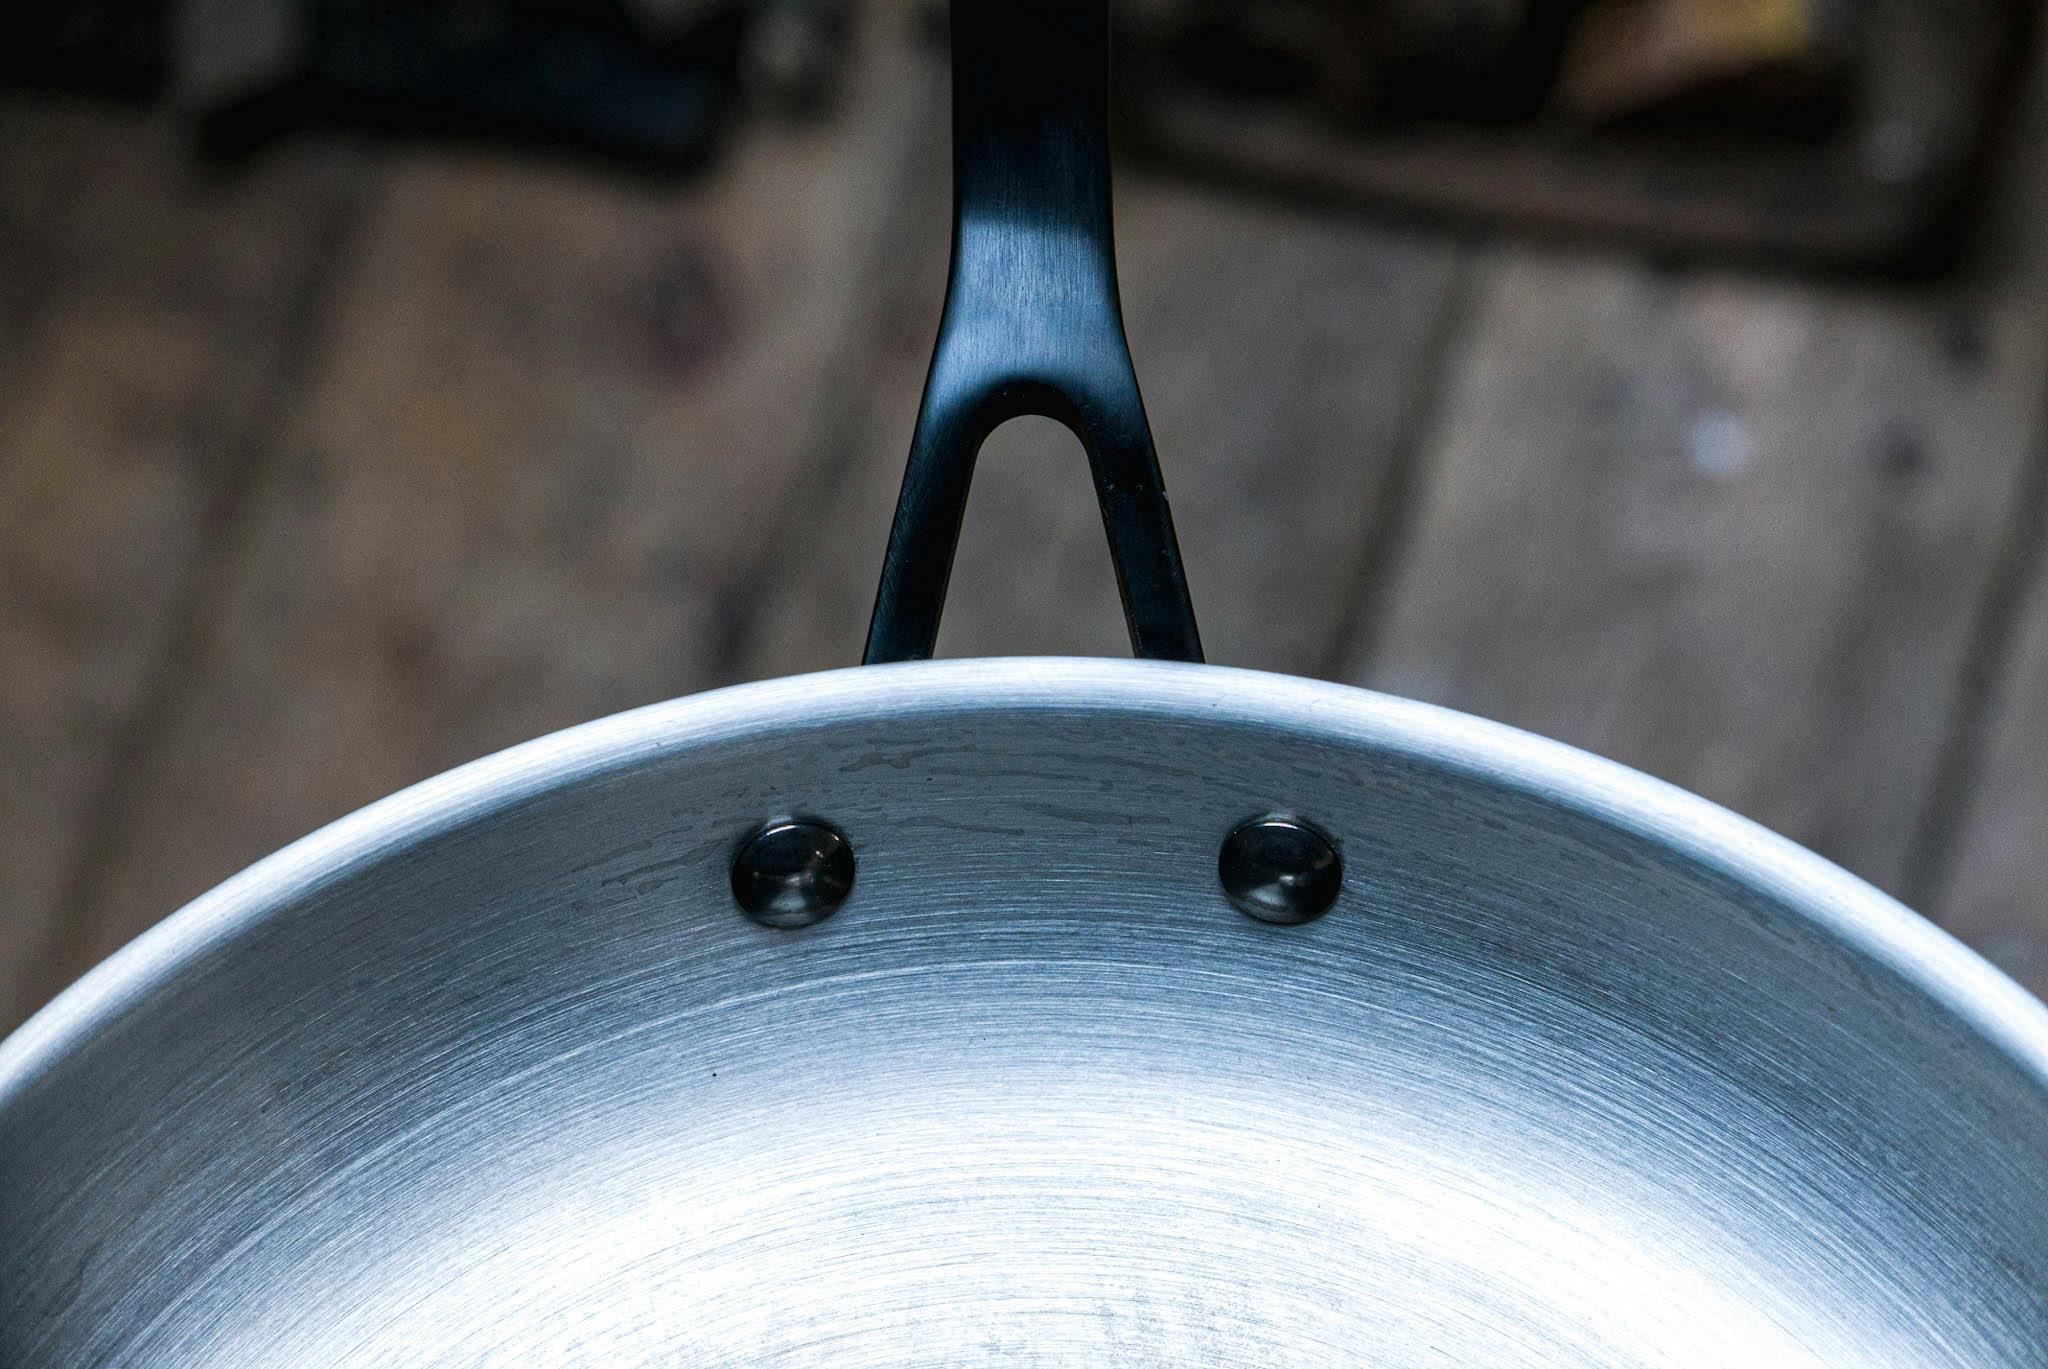 The KitchenAid 5-Ply Clad Stainless Steel Induction Frying Pan, 12.25-Inch, Polished Stainless Steel.